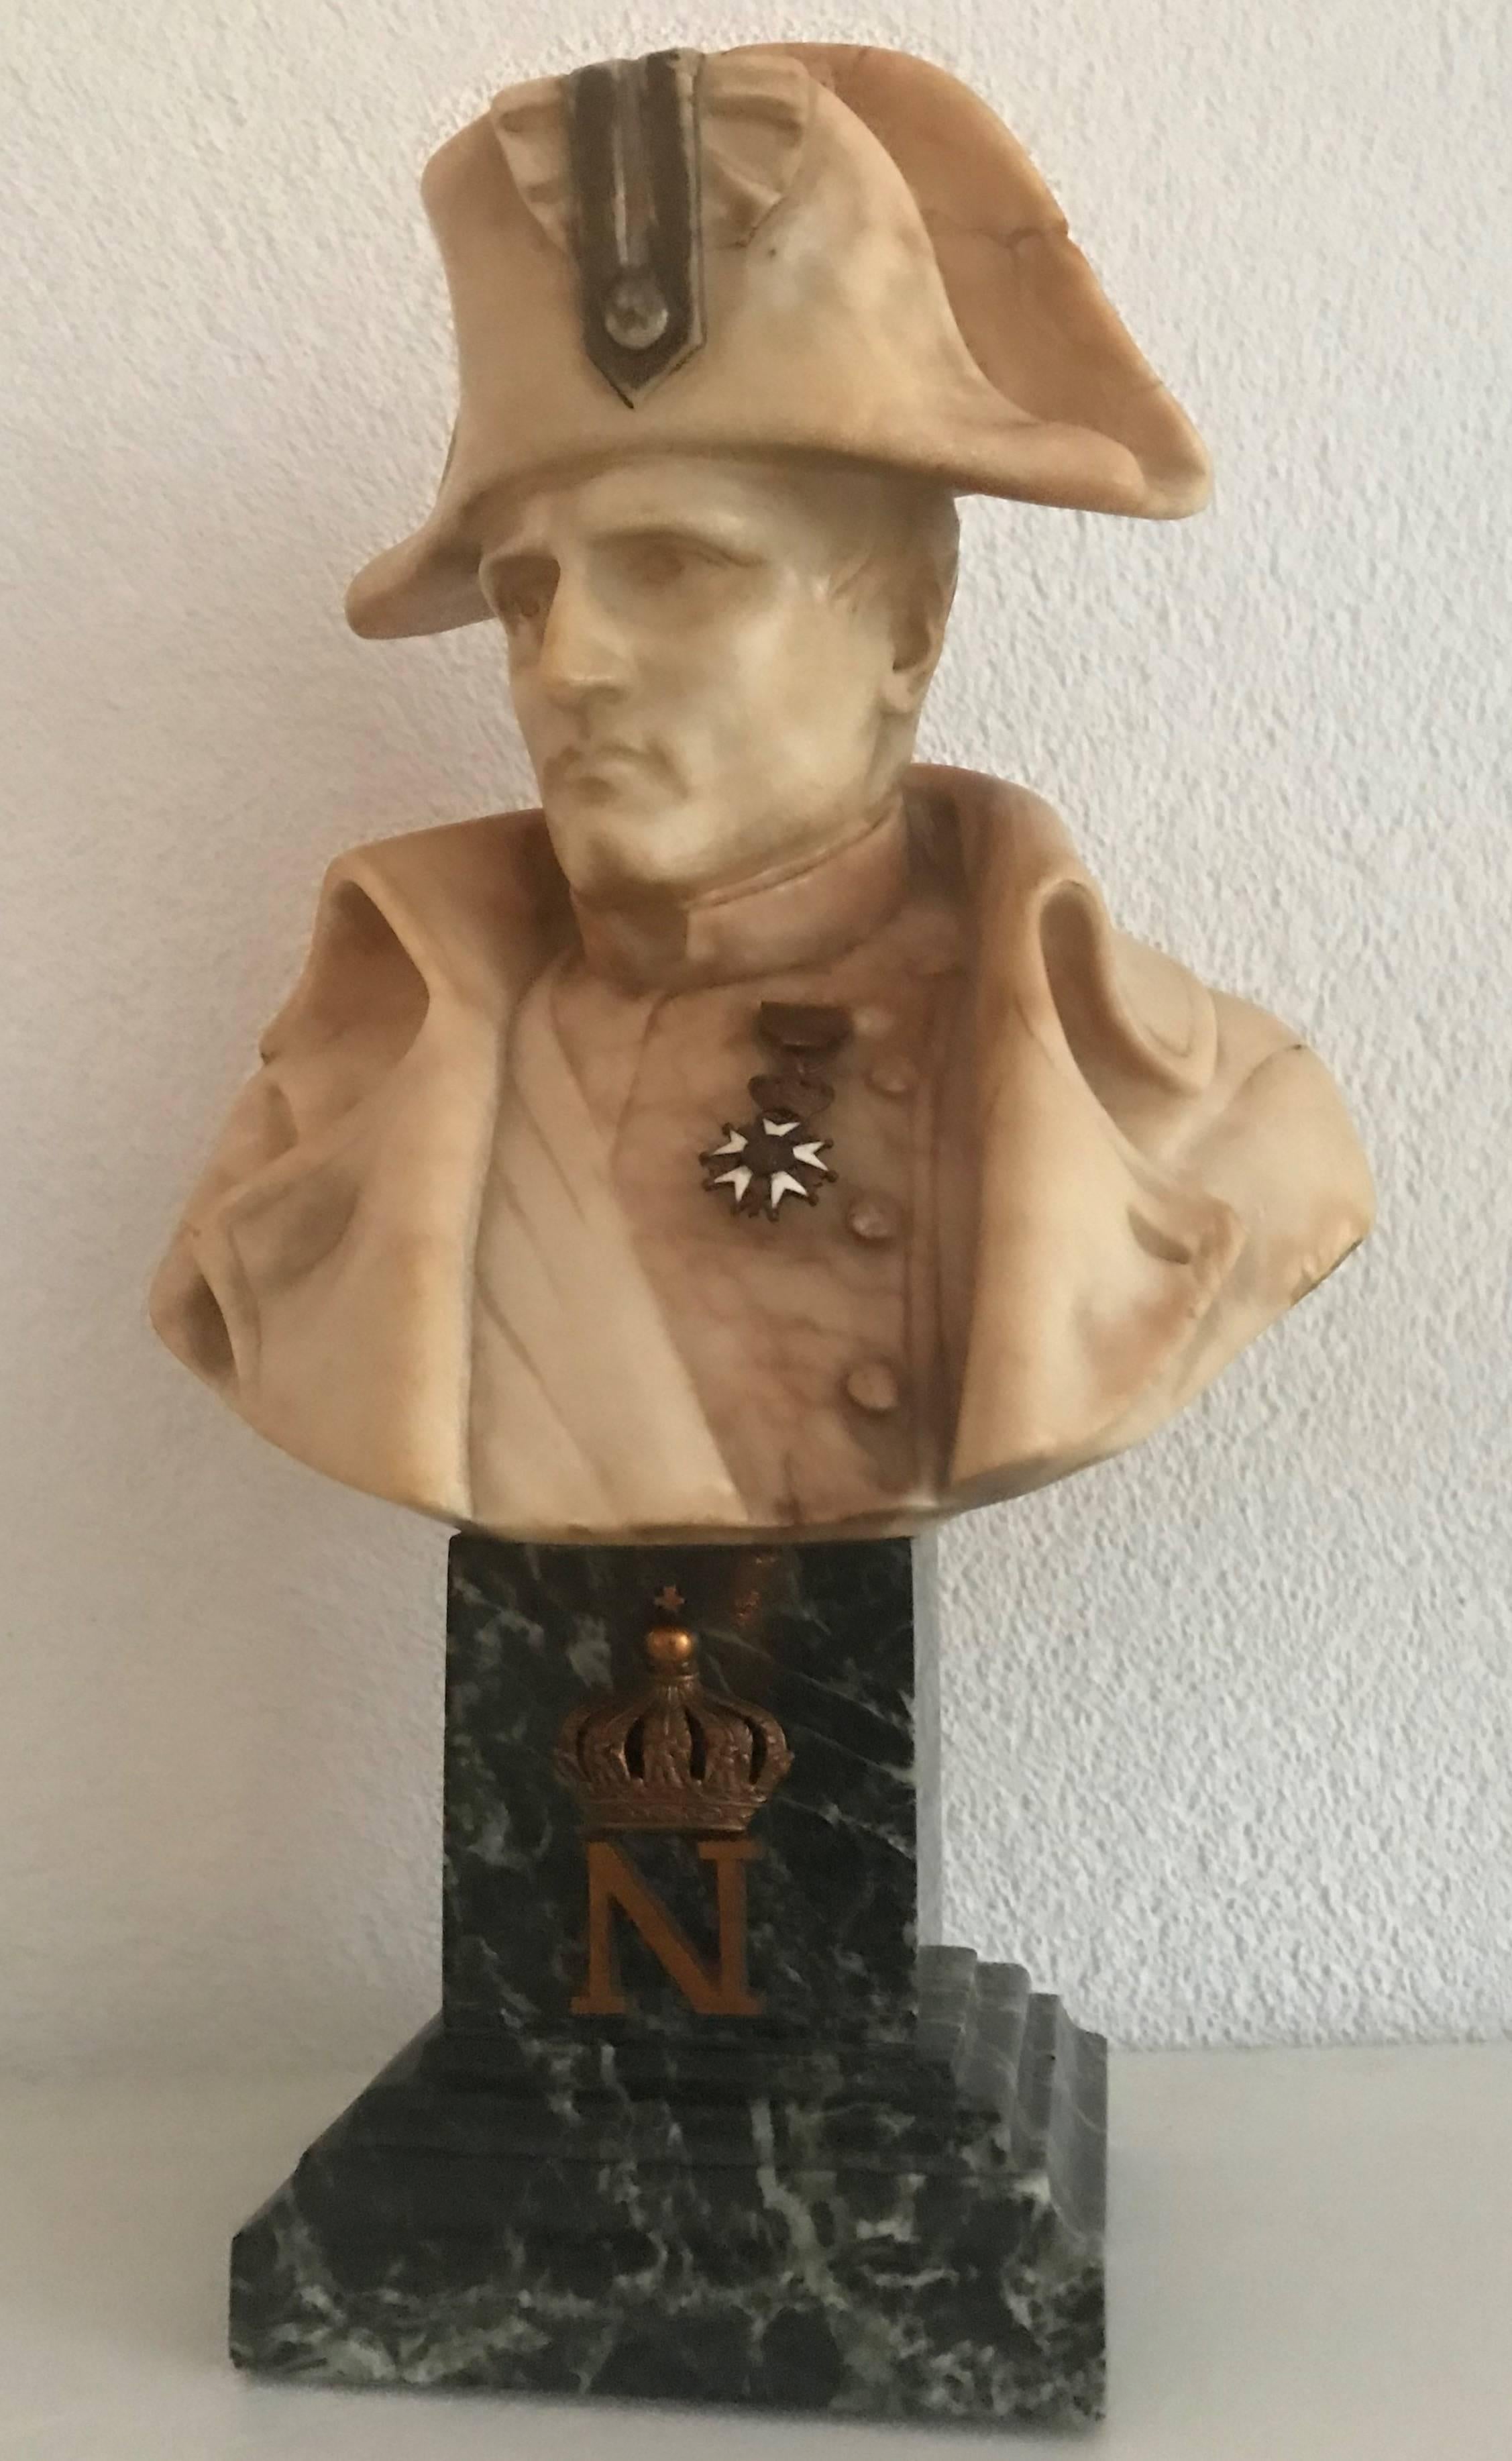 Good quality, handcrafted bust of Napoleon Bonaparte.

If you are a collector of good quality antiques having to do with (French) historical figures then this rare and wonderful alabaster bust of Napoleon Bonaparte could be perfect for your